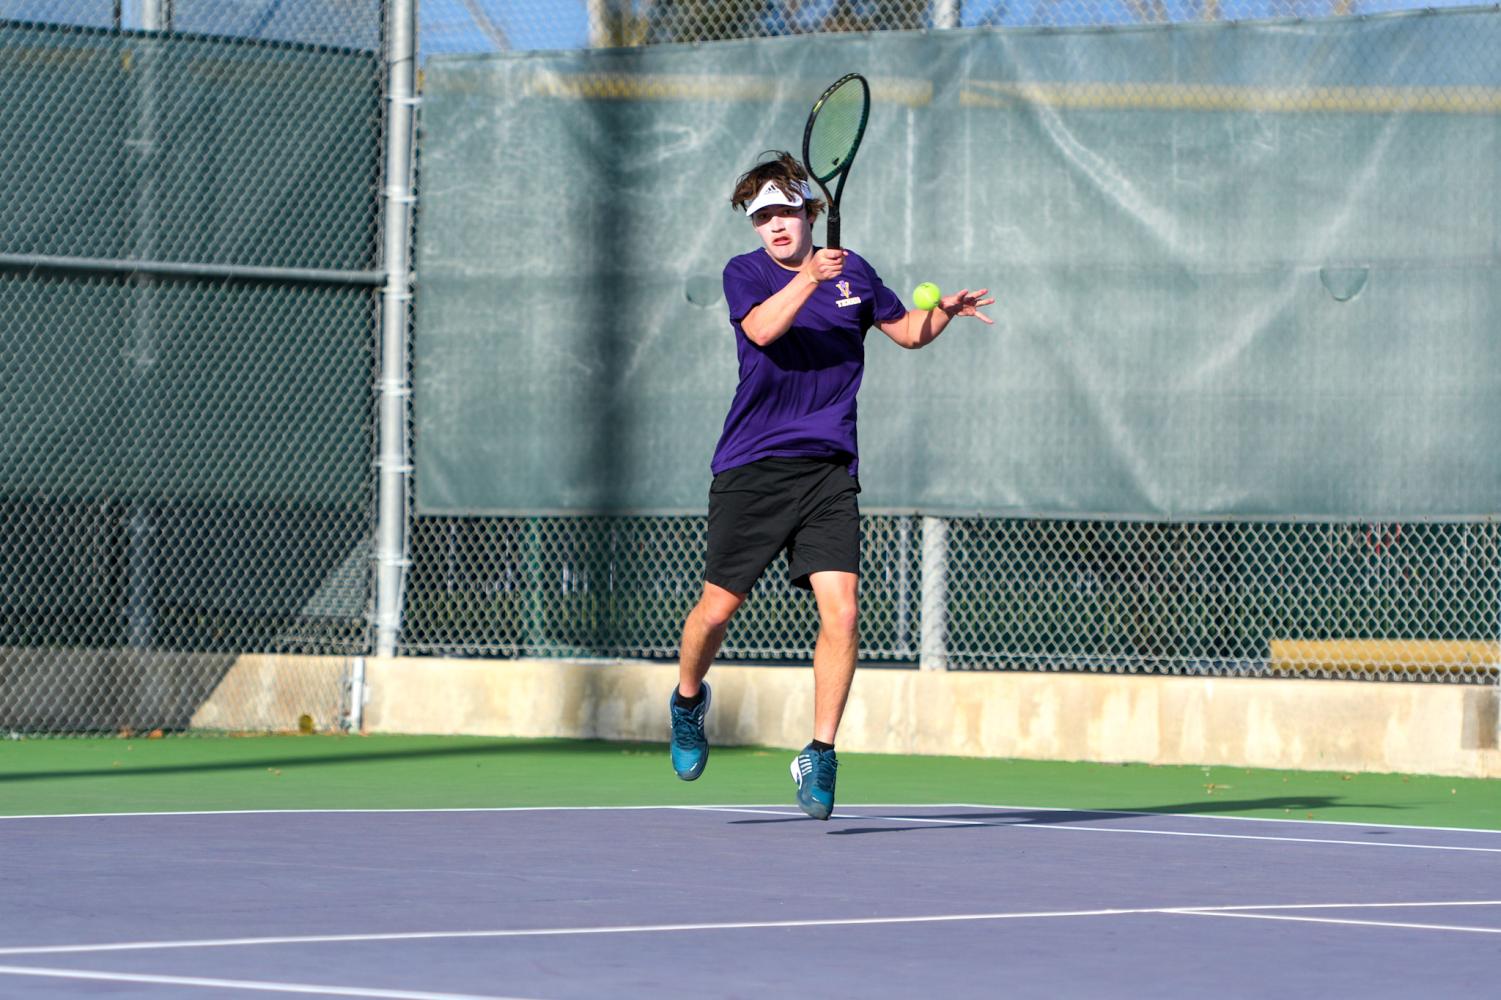 Boys+Varsity+Tennis+defeats+Foothill+in+an+exciting+6-3+victory